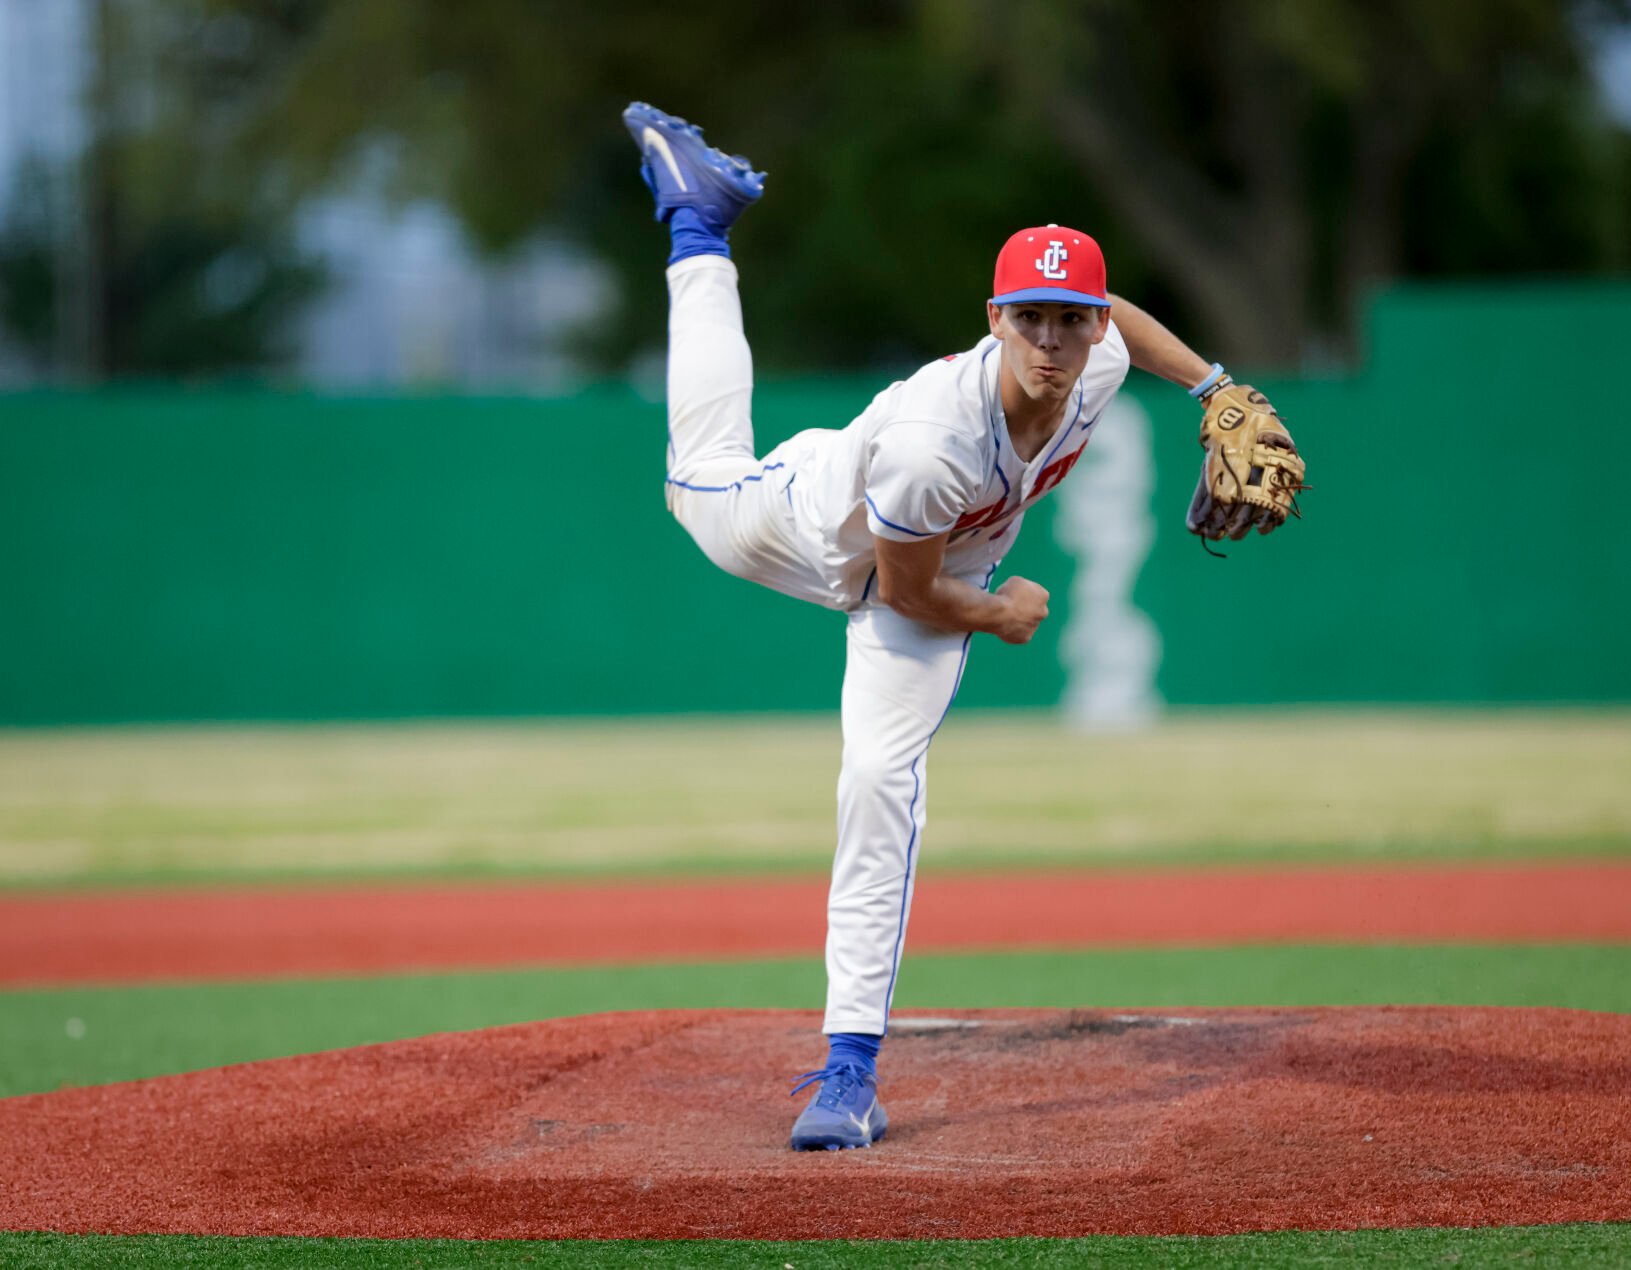 The John Curtis-Rummel semifinal lasted 11 innings and ended on a bunt